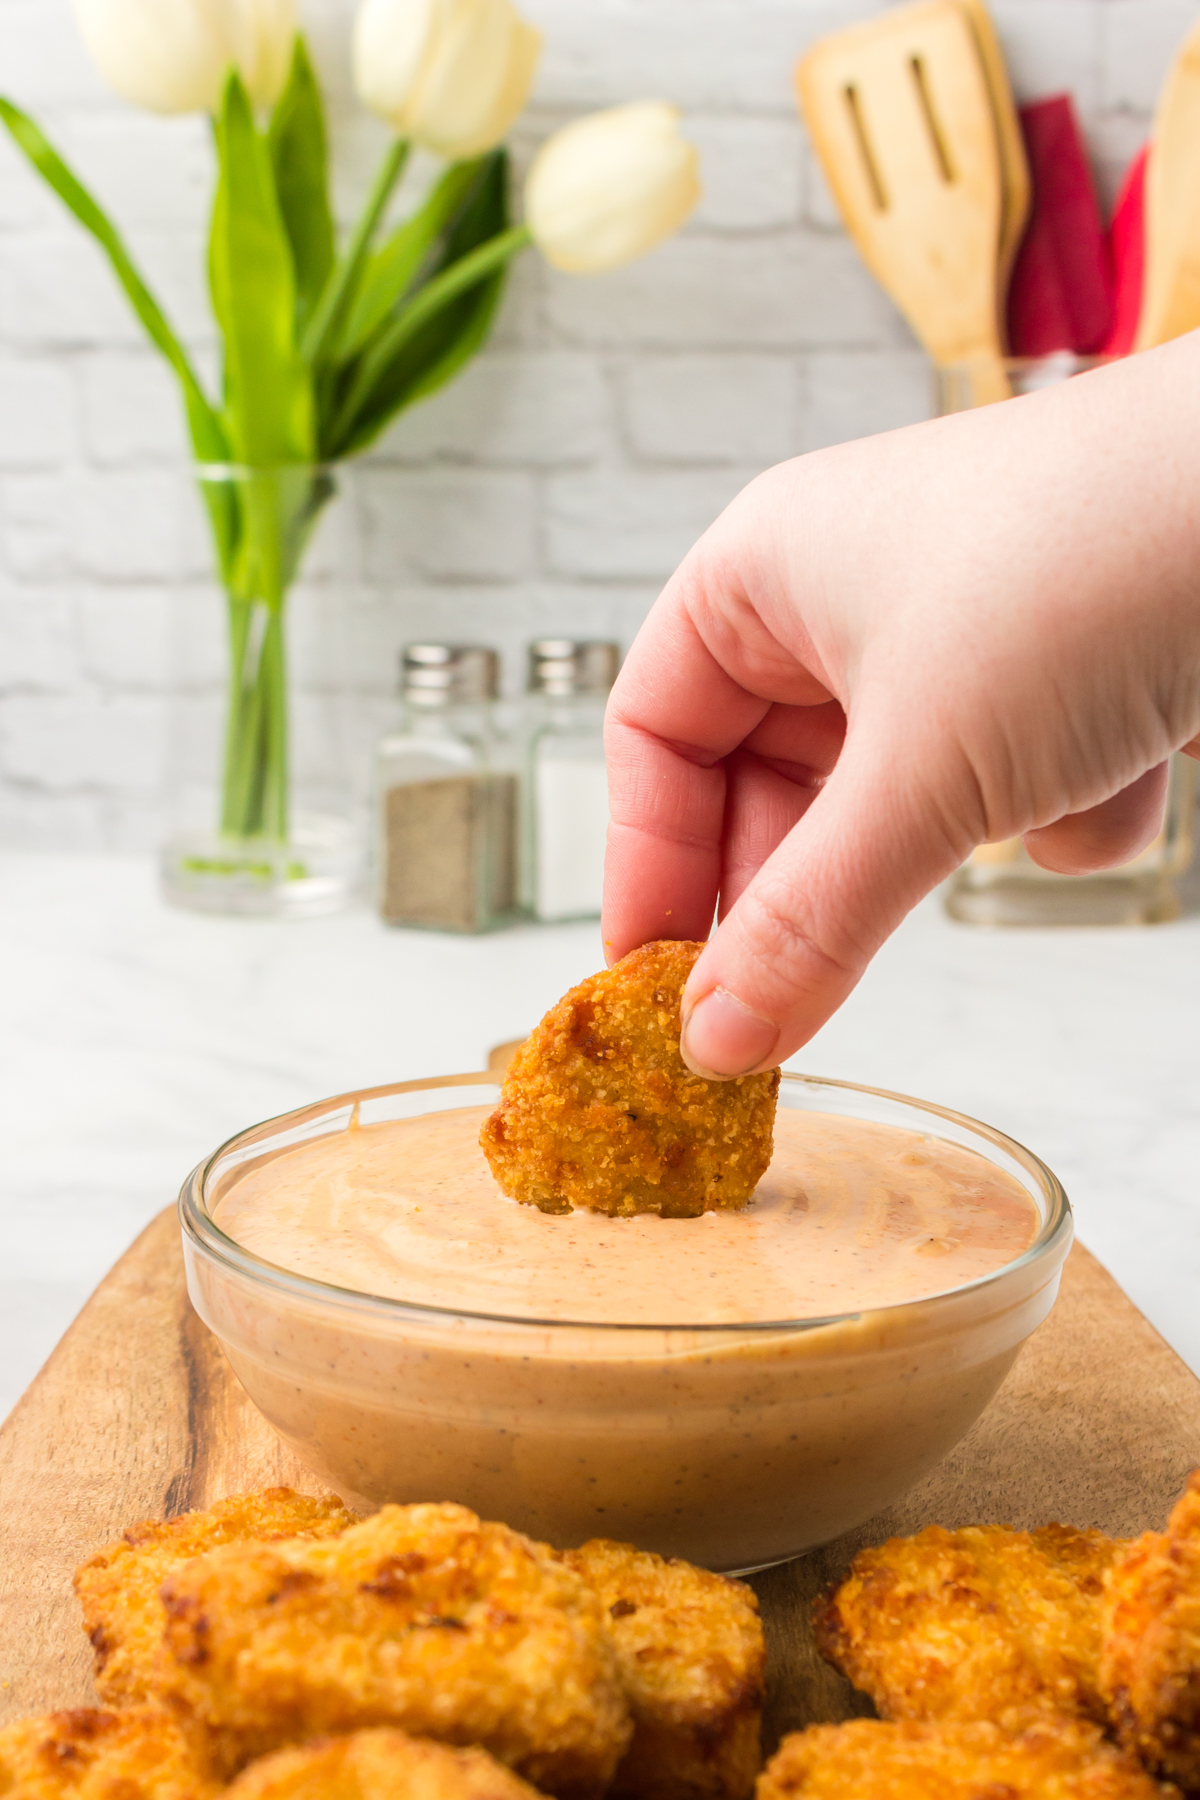 Chicken nugget being dipped in this perfect condiment sauce